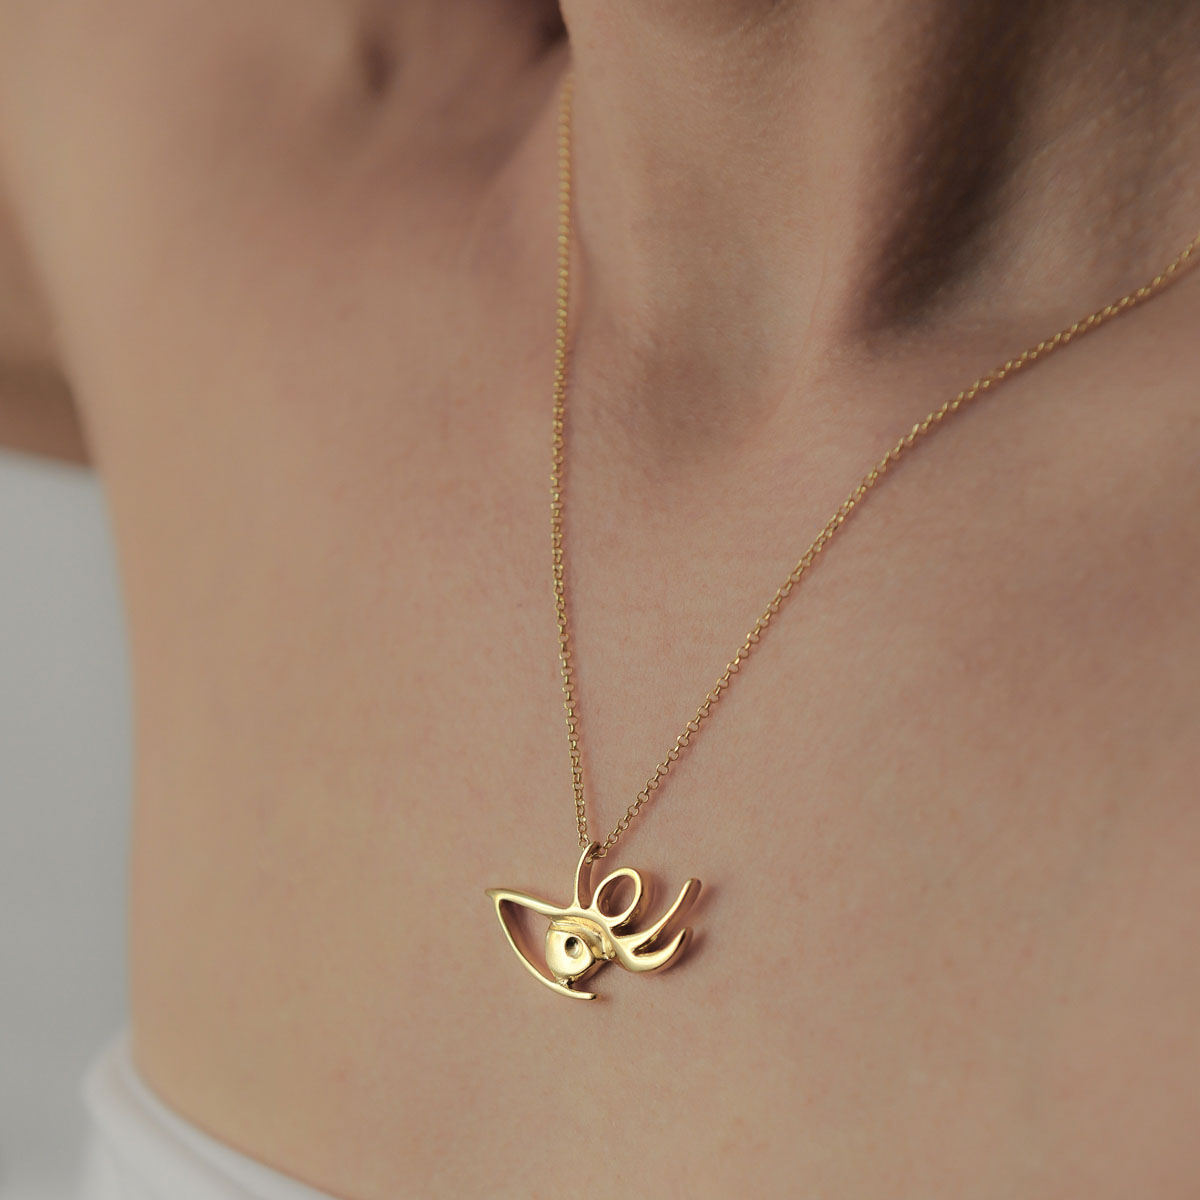 Eye necklace is gold plated silver. Design and handmade for Bead A Boo jewelry by Katerina Glinou.